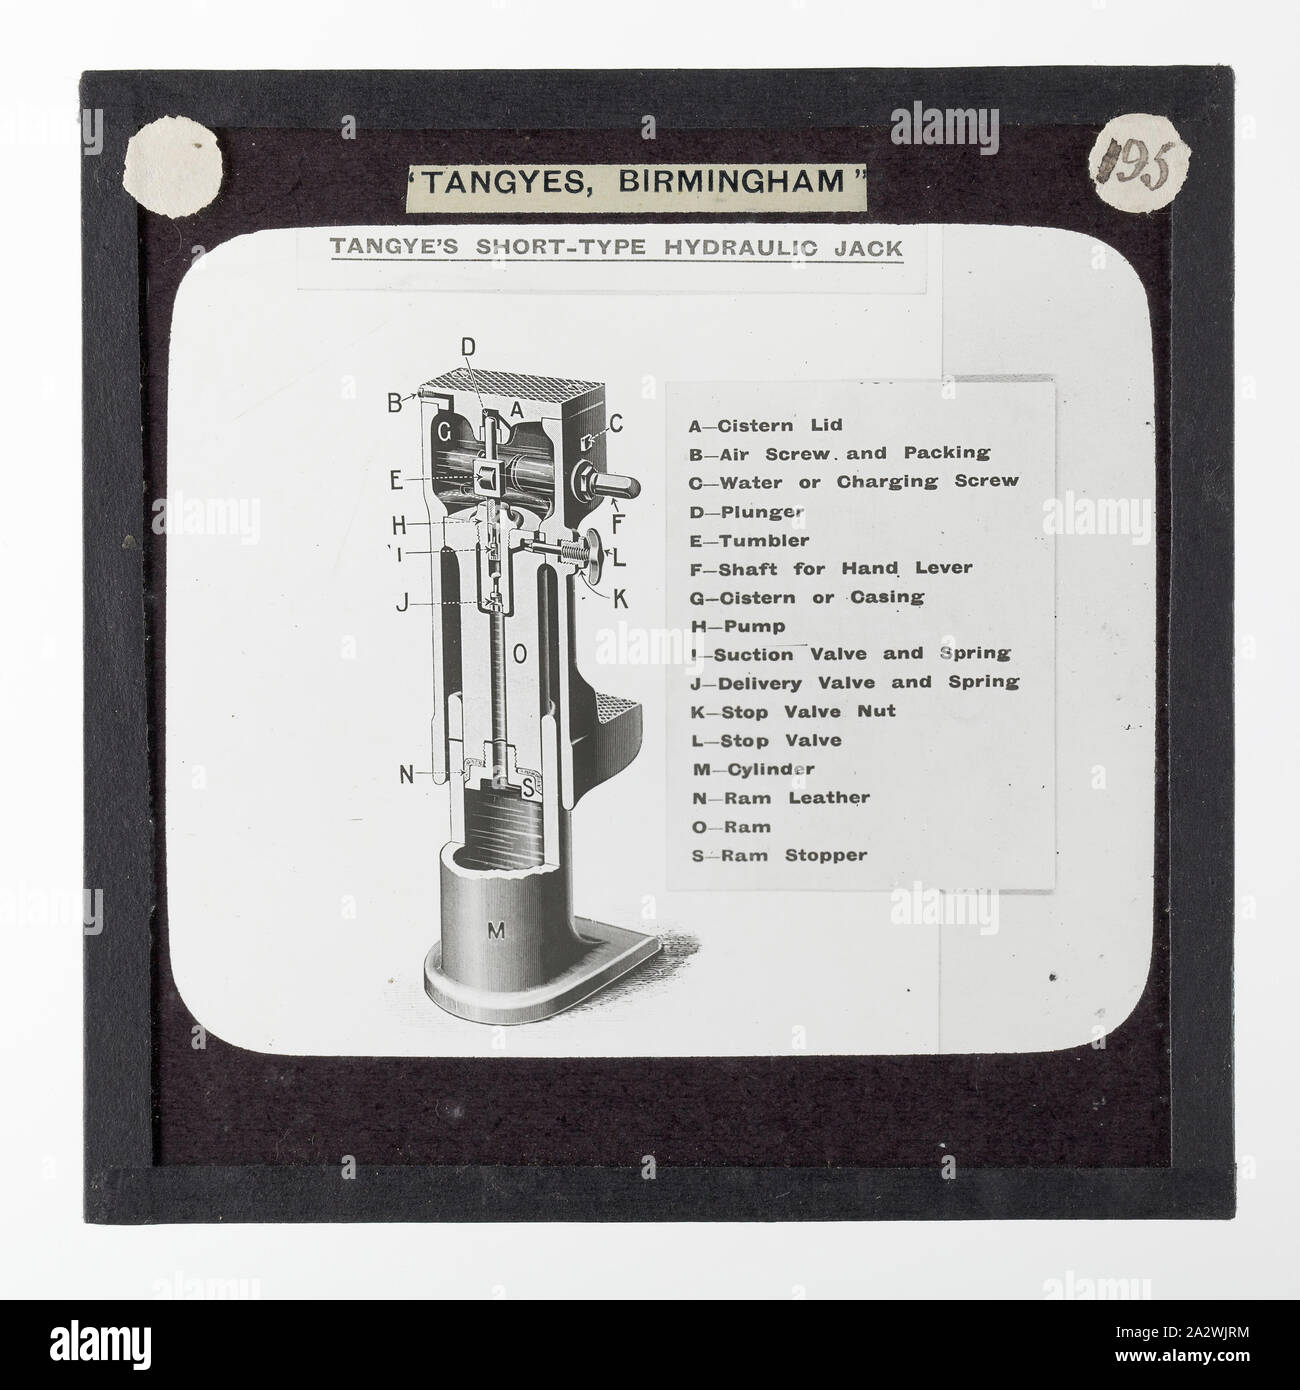 Lantern Slide - Tangyes Ltd, Lifting Jack Diagram, circa 1910, One of 239 glass lantern slides depicting products manufactured by Tangyes Limited engineers of Birmingham, England. The images include various products such as engines, centrifugal pumps, hydraulic pumps, gas producers, materials testing machines, presses, machine tools, hydraulic jacks etc. Tangyes was a company which operated from 1857 to 1957. They produced a wide variety of engineering Stock Photo